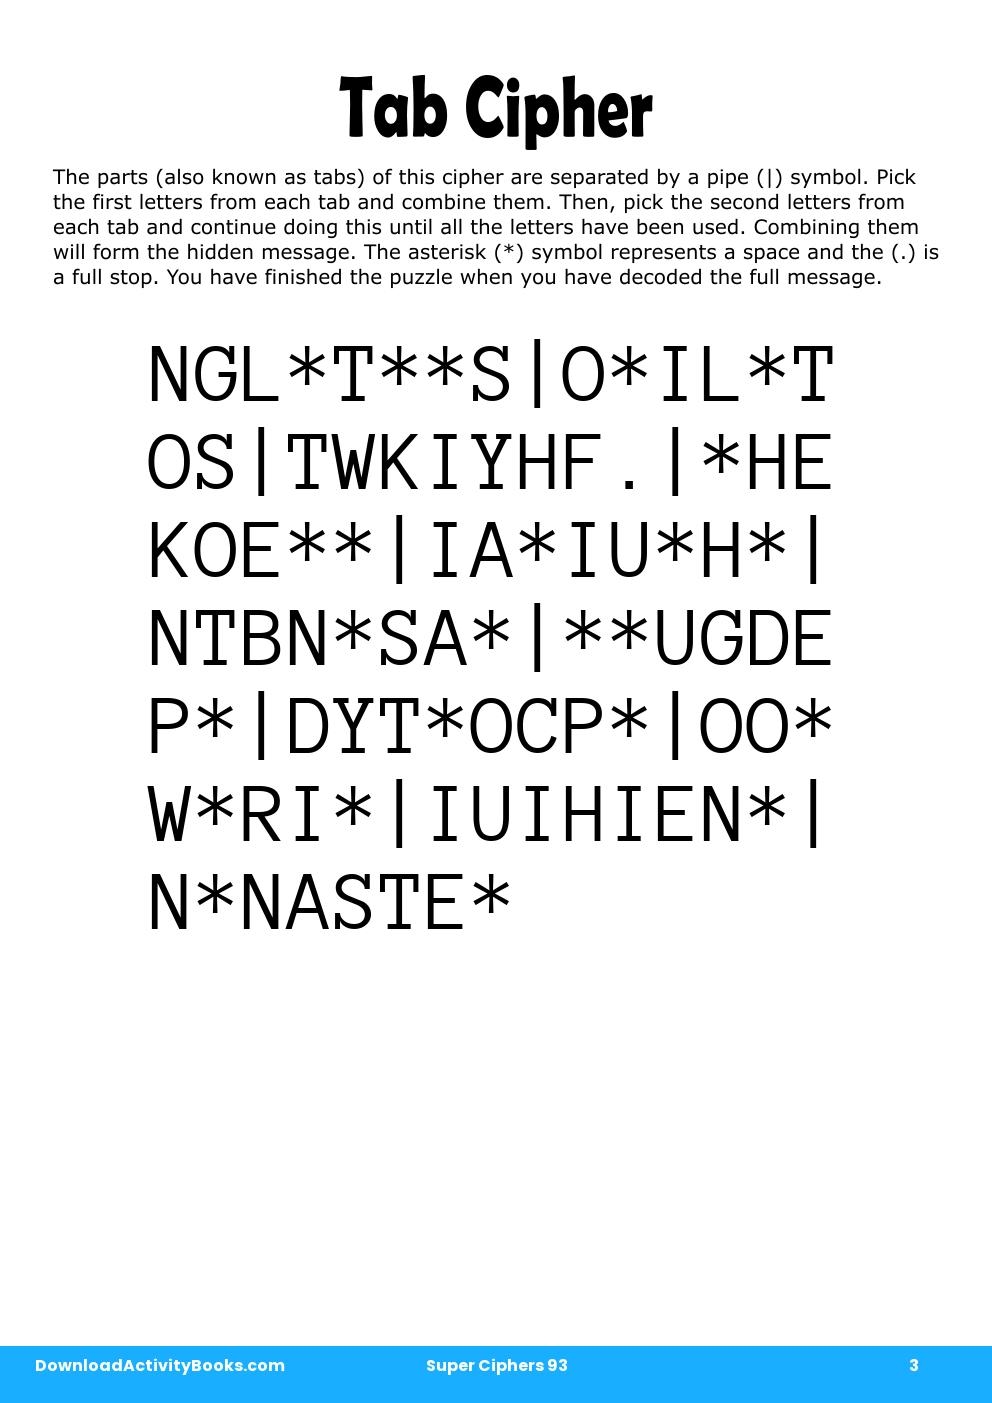 Tab Cipher in Super Ciphers 93